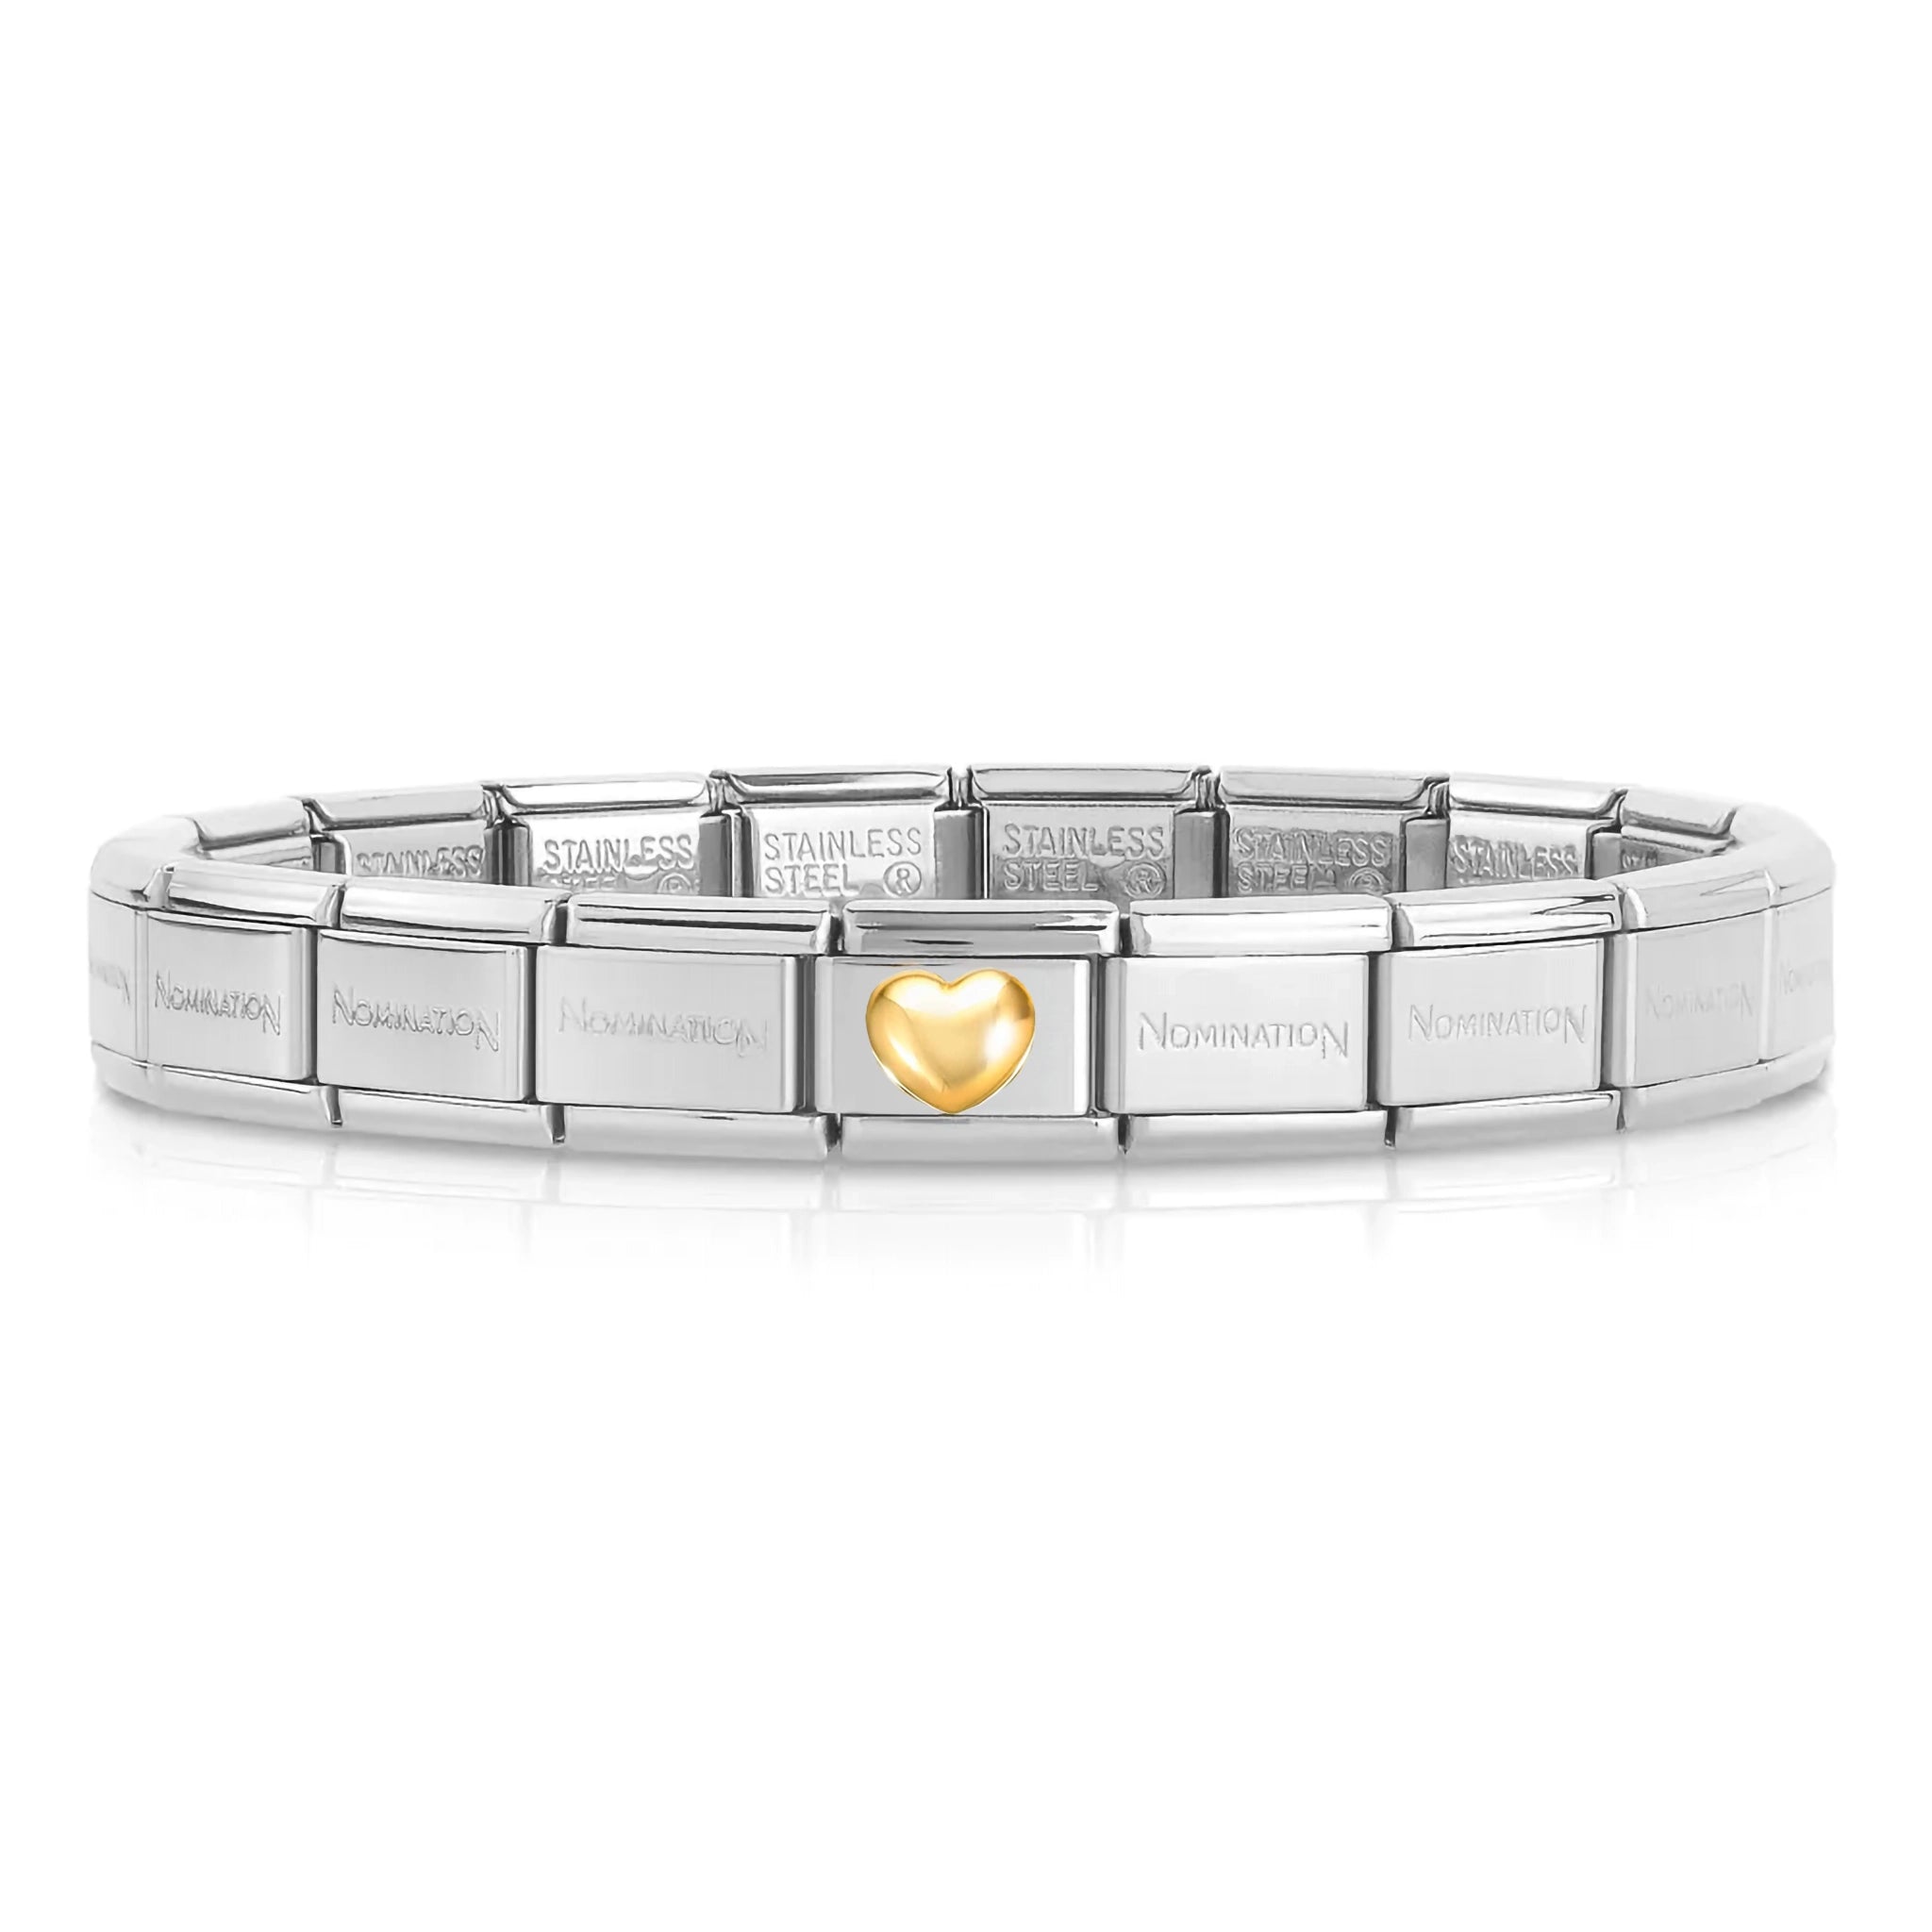 A stainless steel Nomination bracelet with a single charm featuring a gold raised heart charm